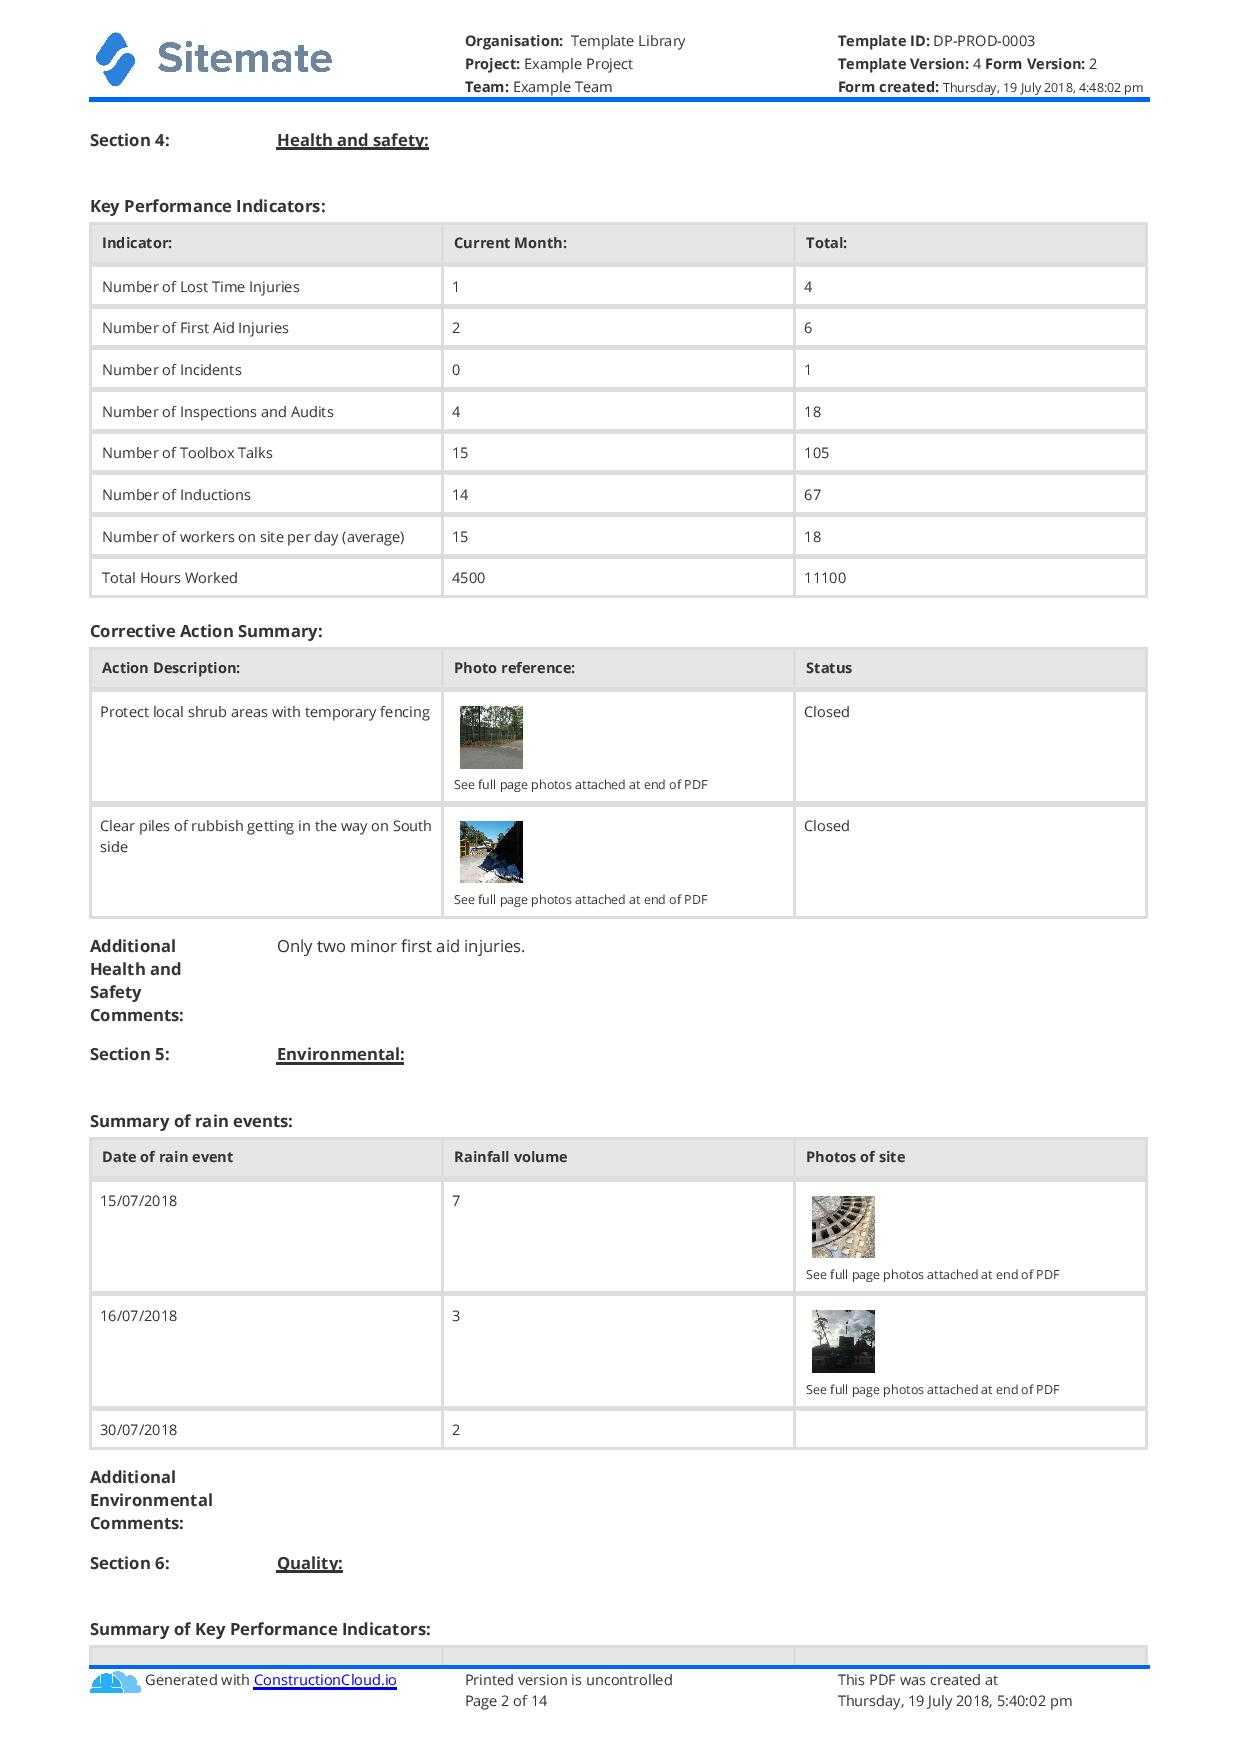 Monthly Construction Progress Report Template: Use This With Monthly Activity Report Template